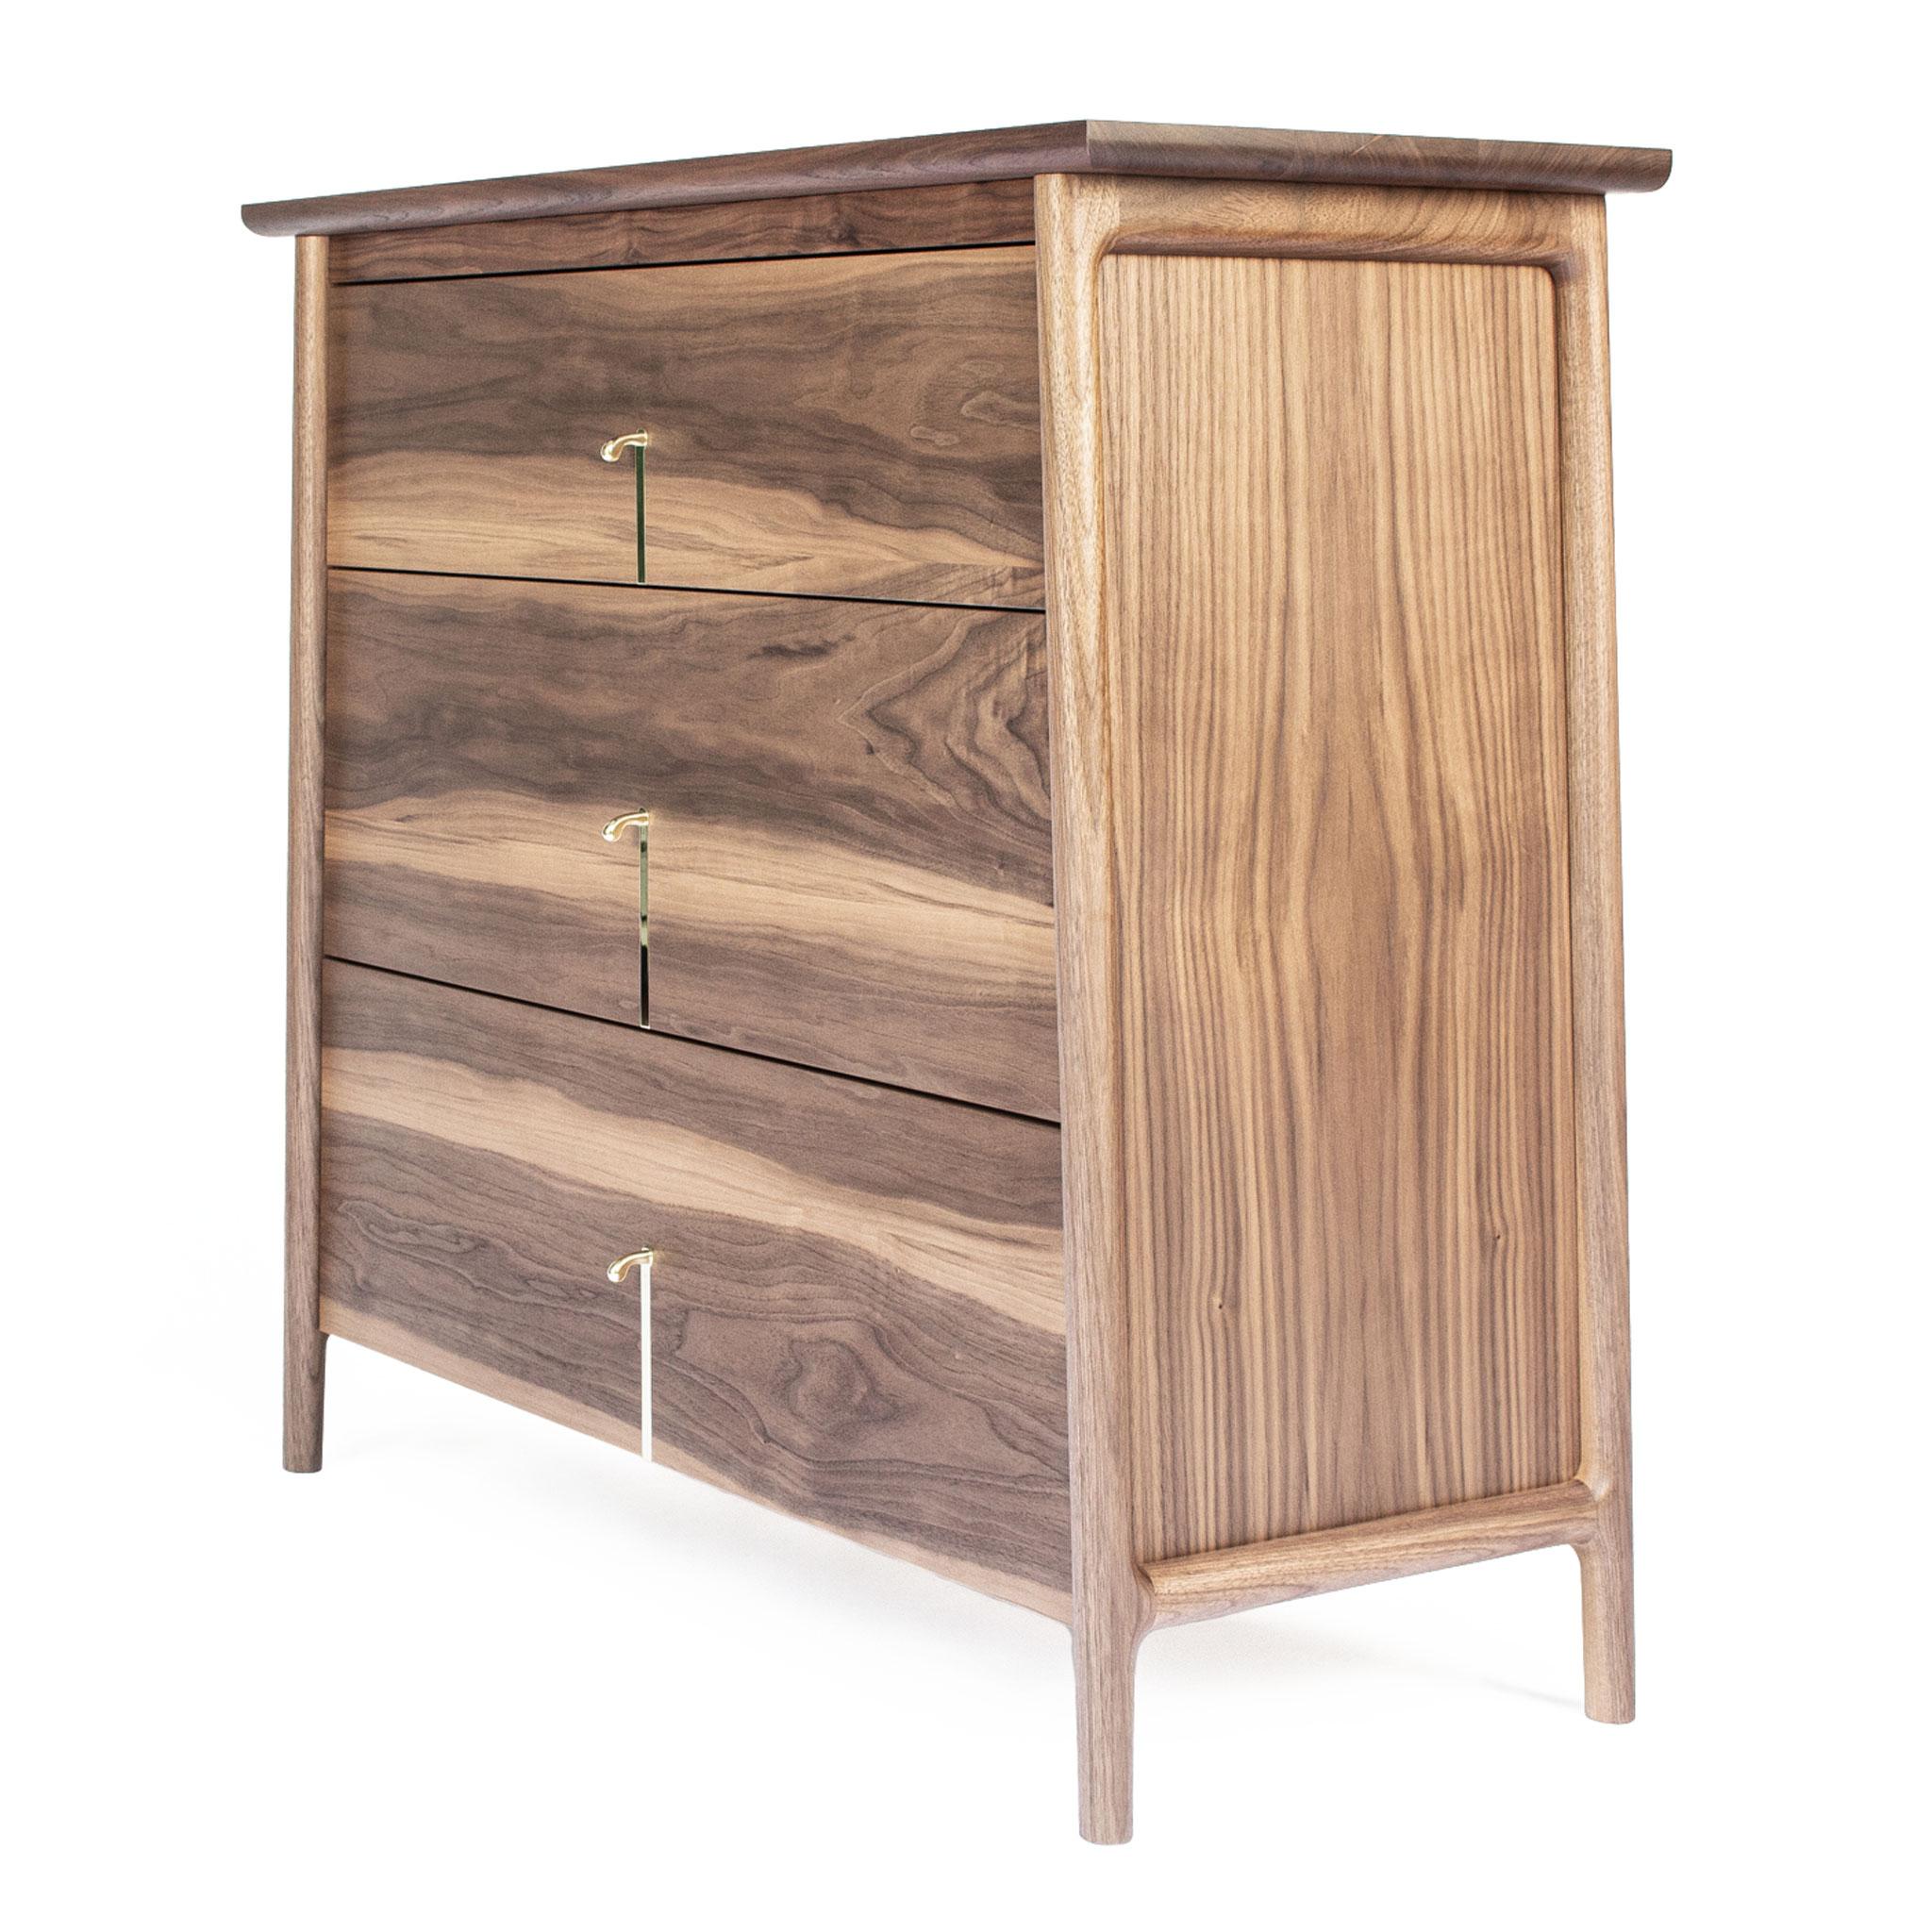 Hardwood dresser with custom drawer pulls. The custom brass pull is inspired by nature, the California Quail topknot. The tapering cabinet sides create a unique and beautiful visual line not often seen in cabinetry. Blumotion undermount soft close